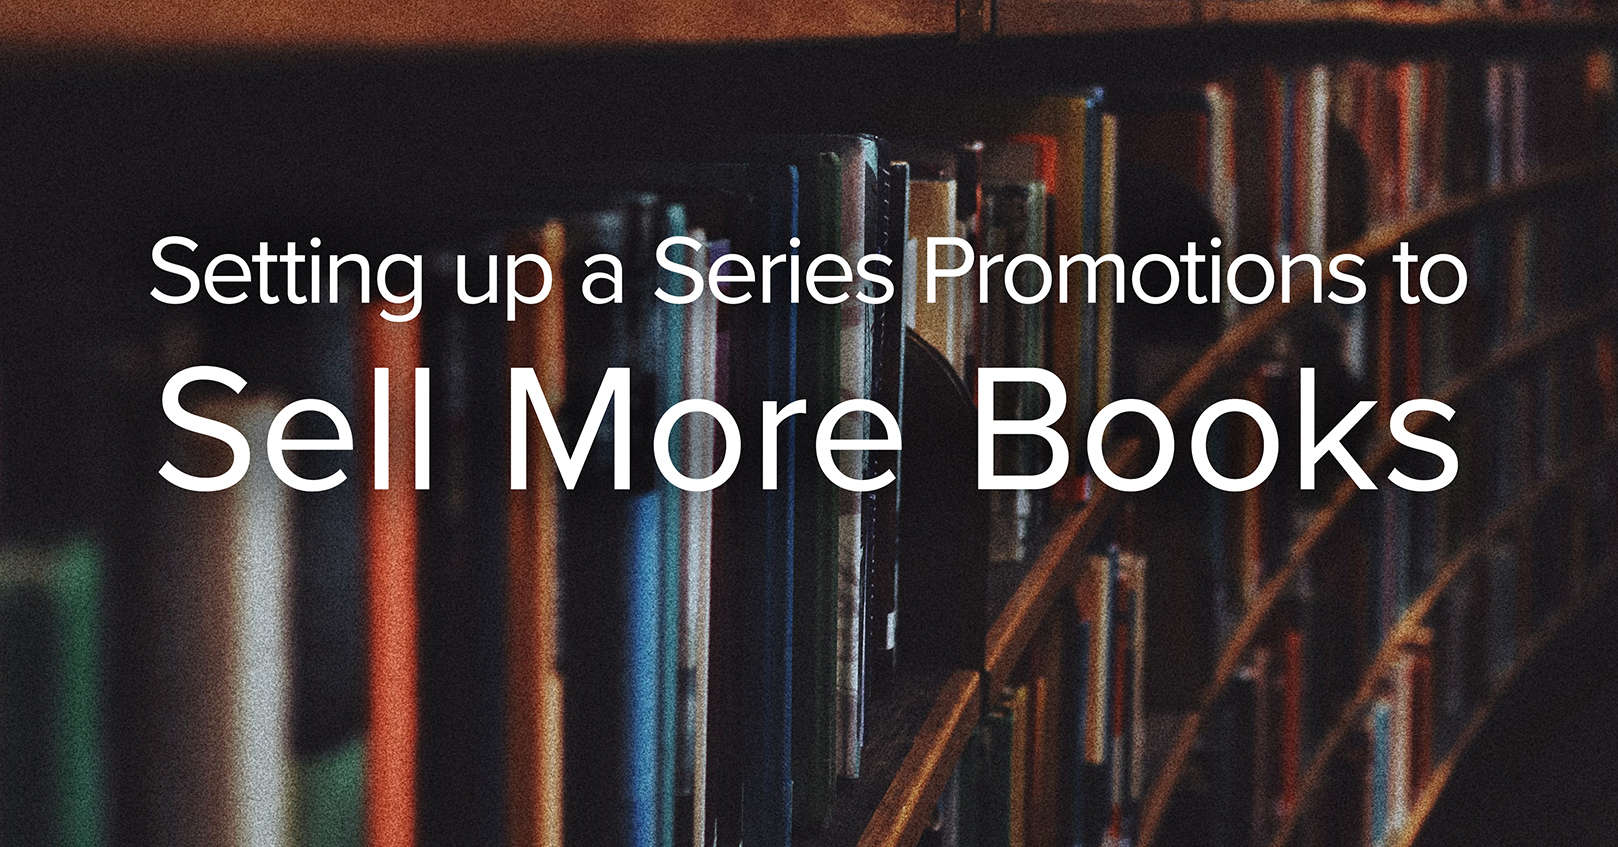 Setting up a Series Promotion to Sell More Books